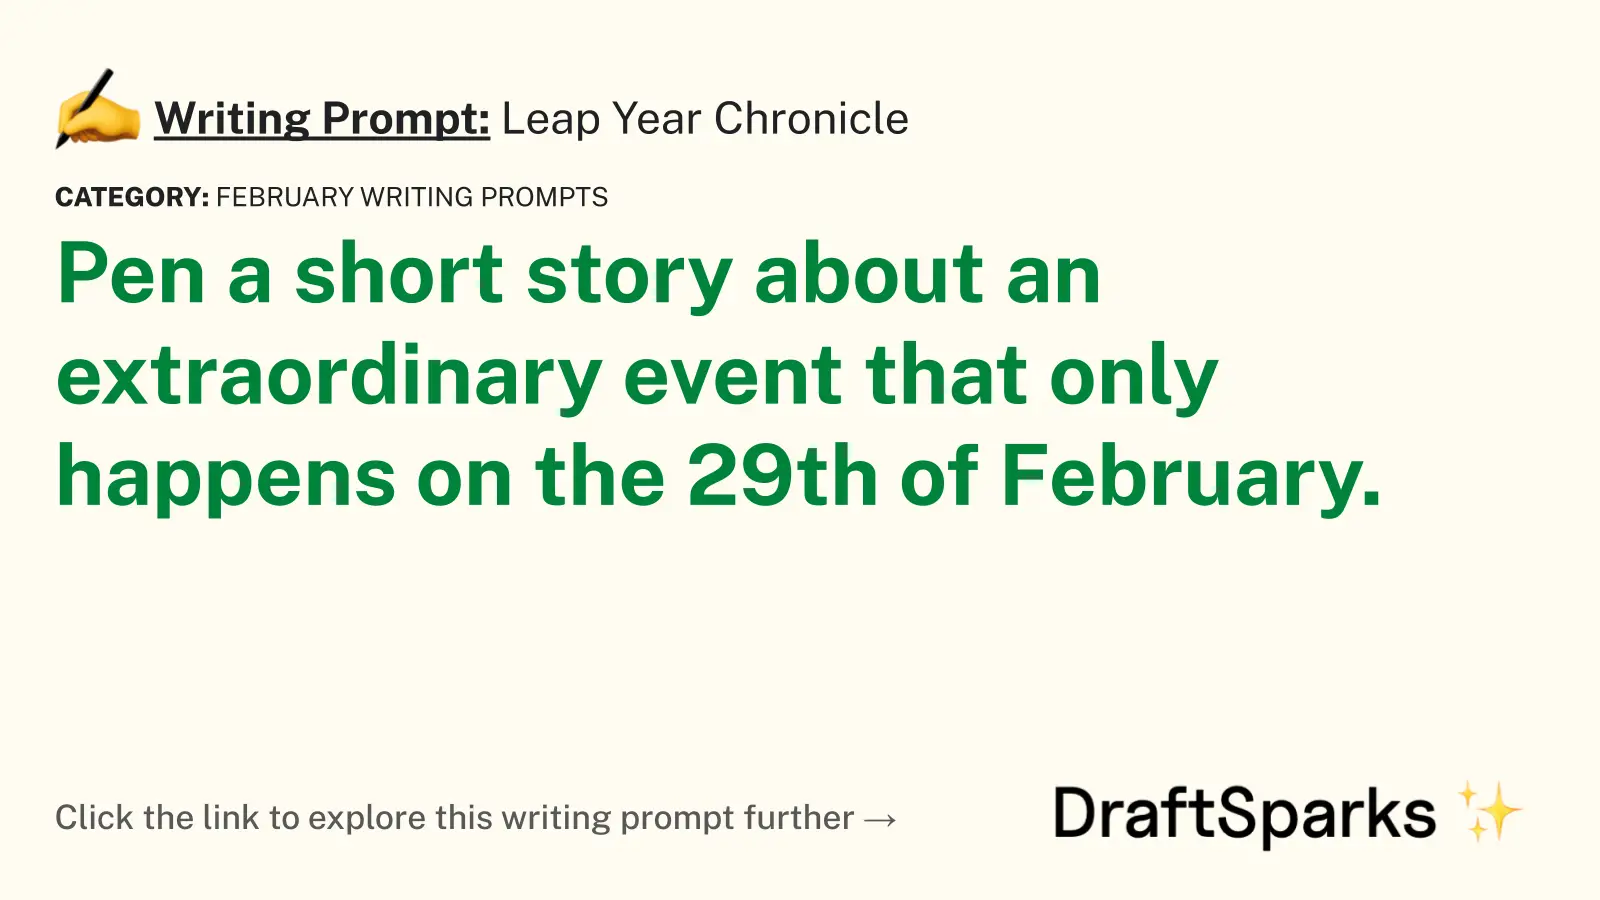 Leap Year Chronicle